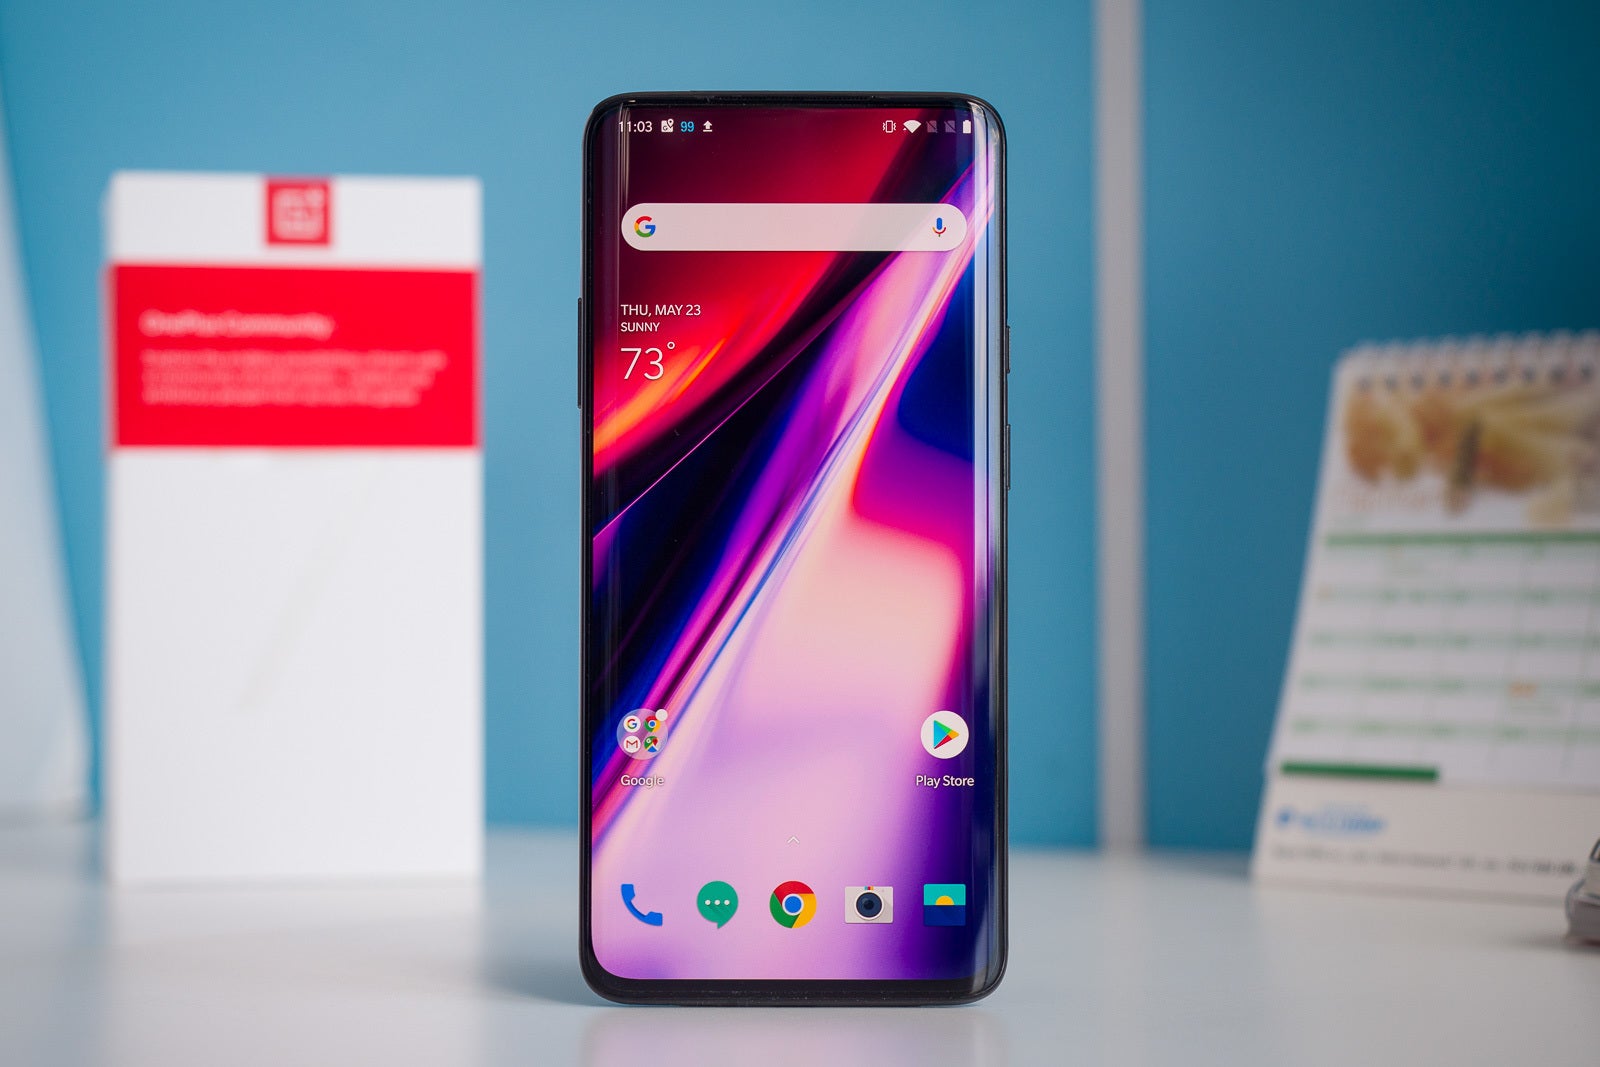 Vote for your favorite phone of the first half of 2019 here!